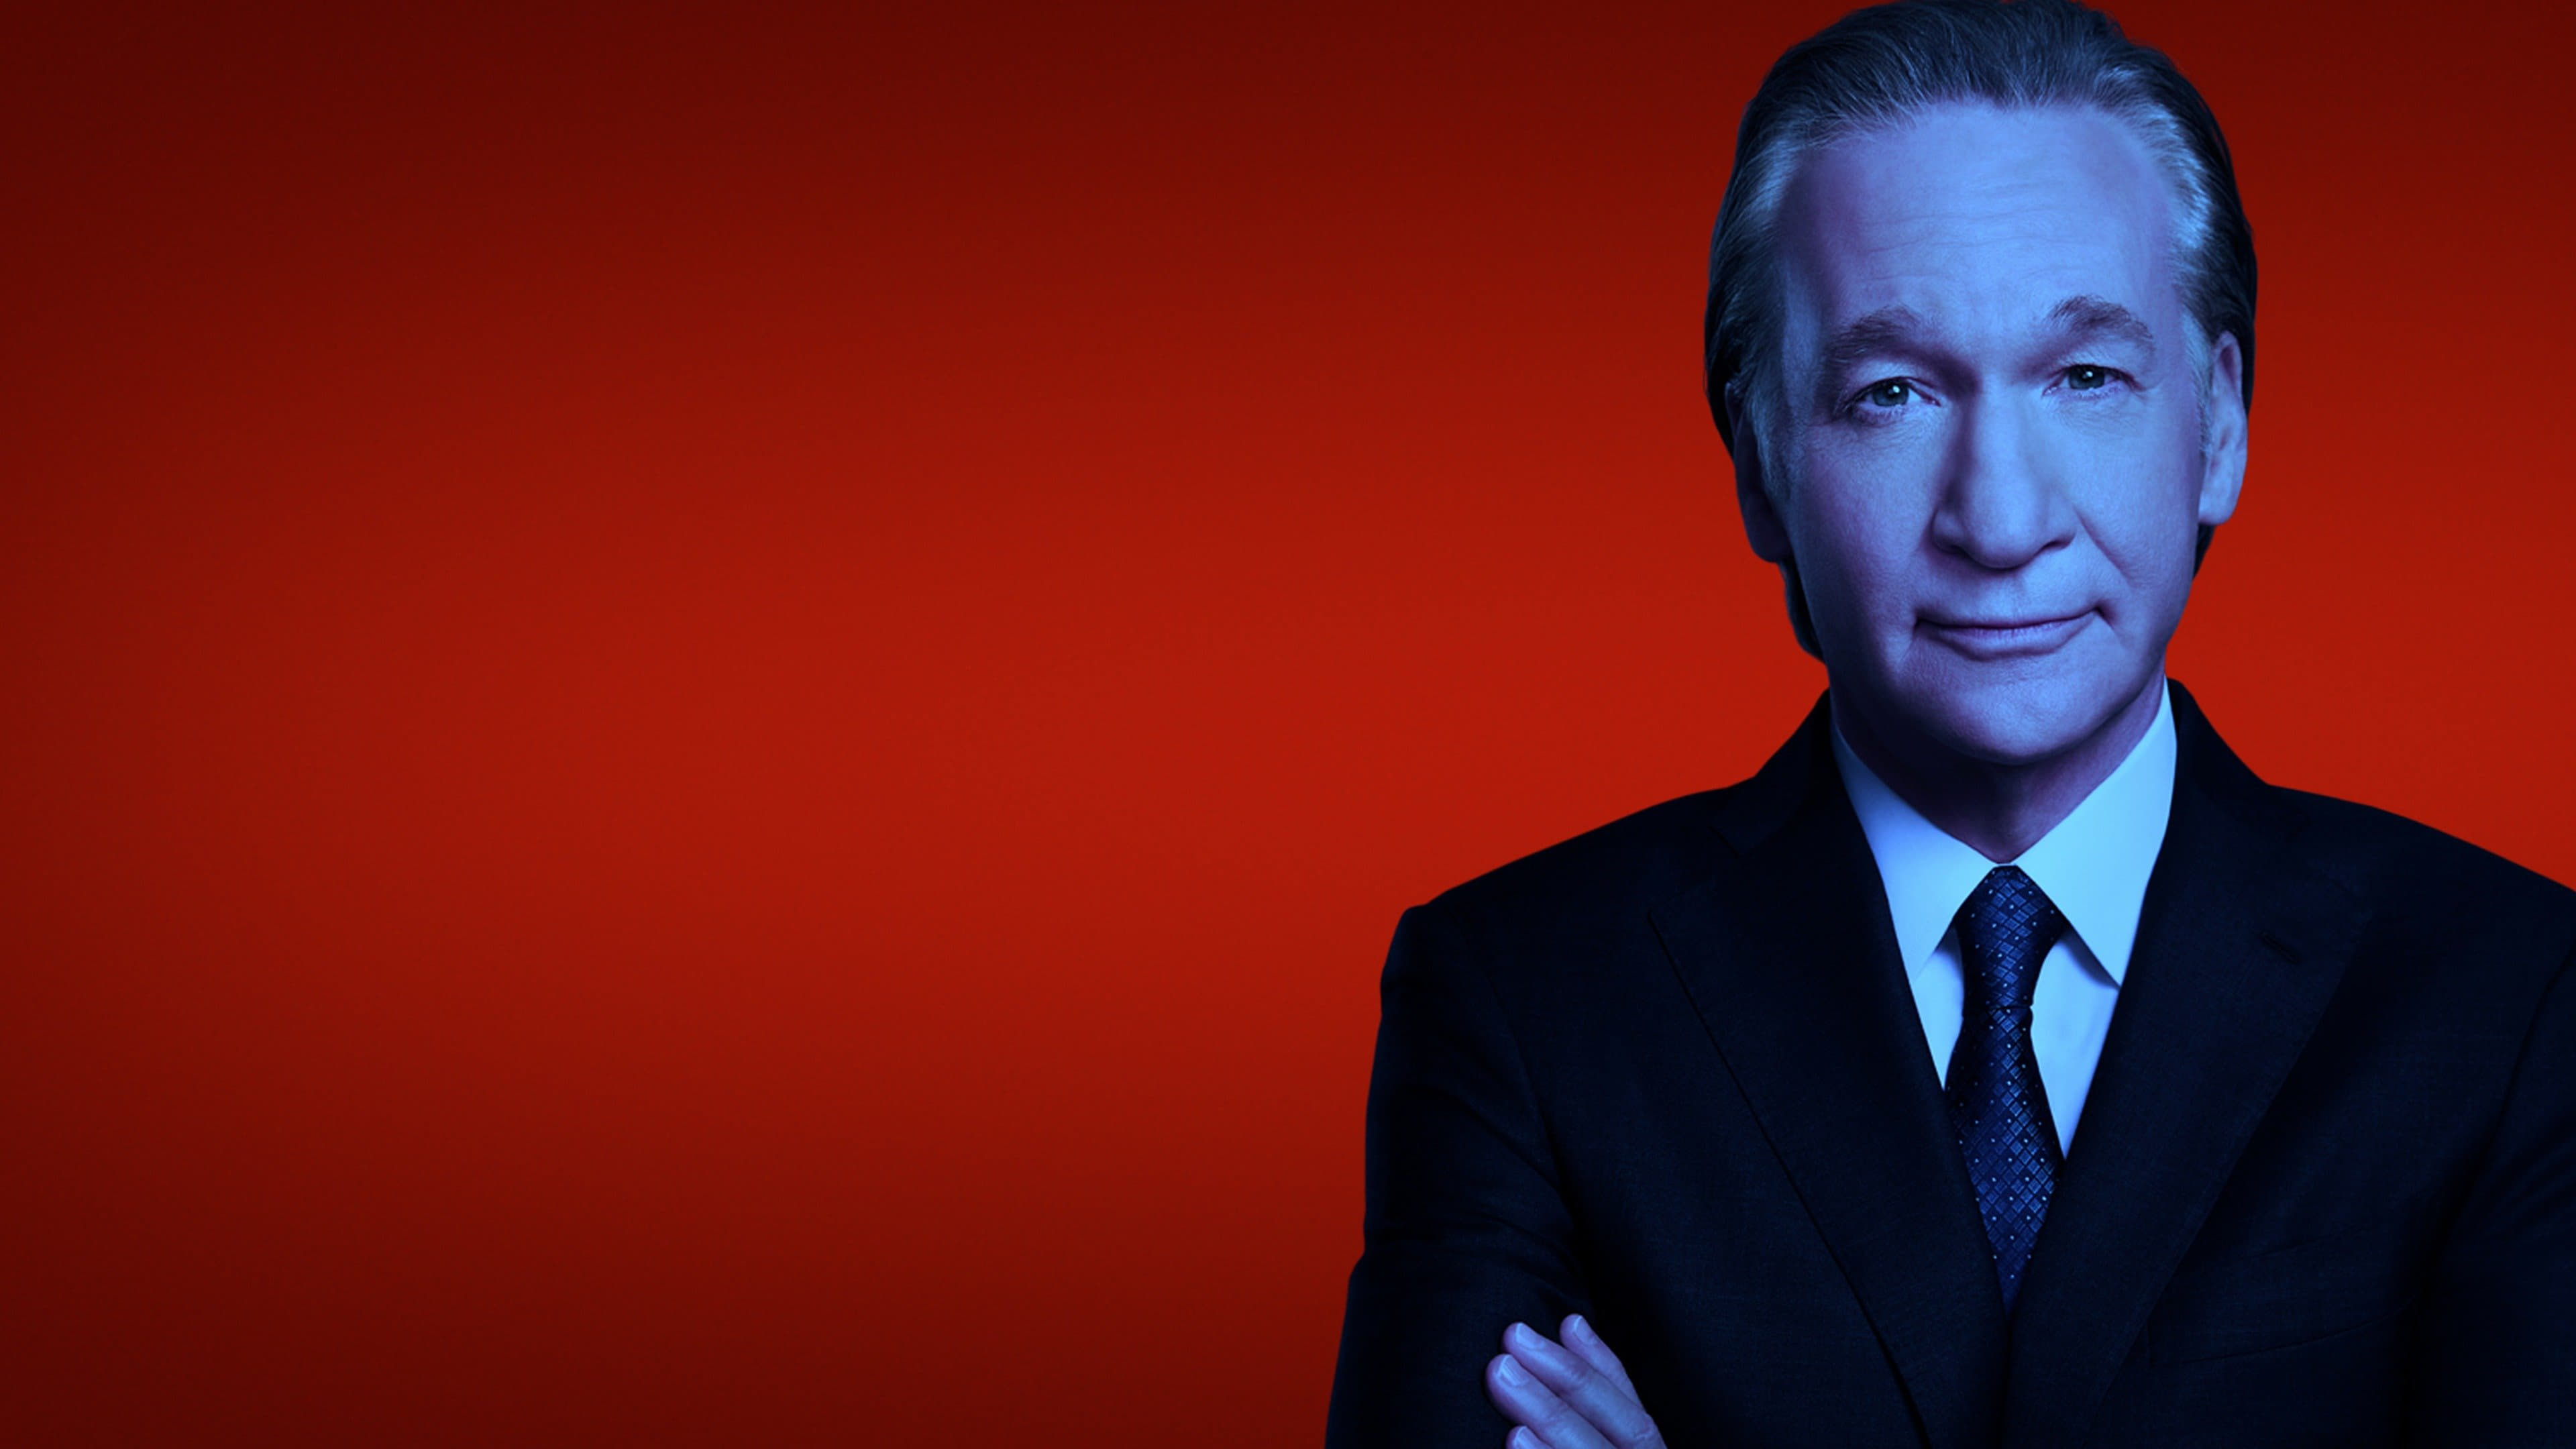 Real Time with Bill Maher - Season 11